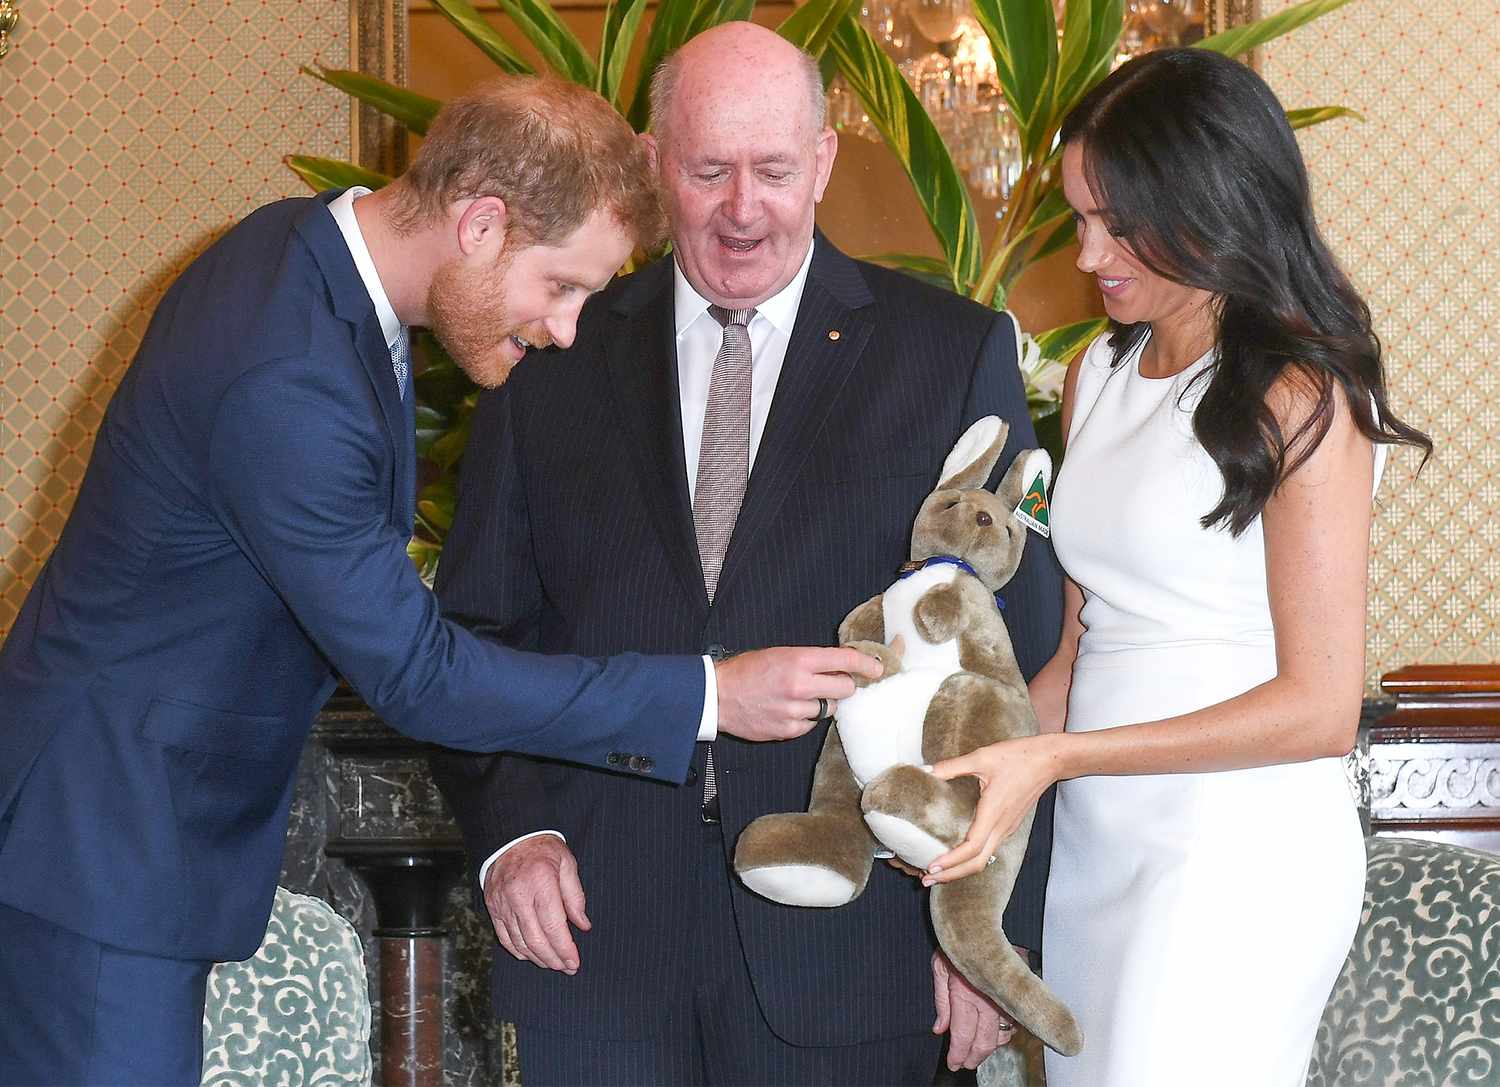 The Duke and Duchess of Sussex Visit Australia - Day 1